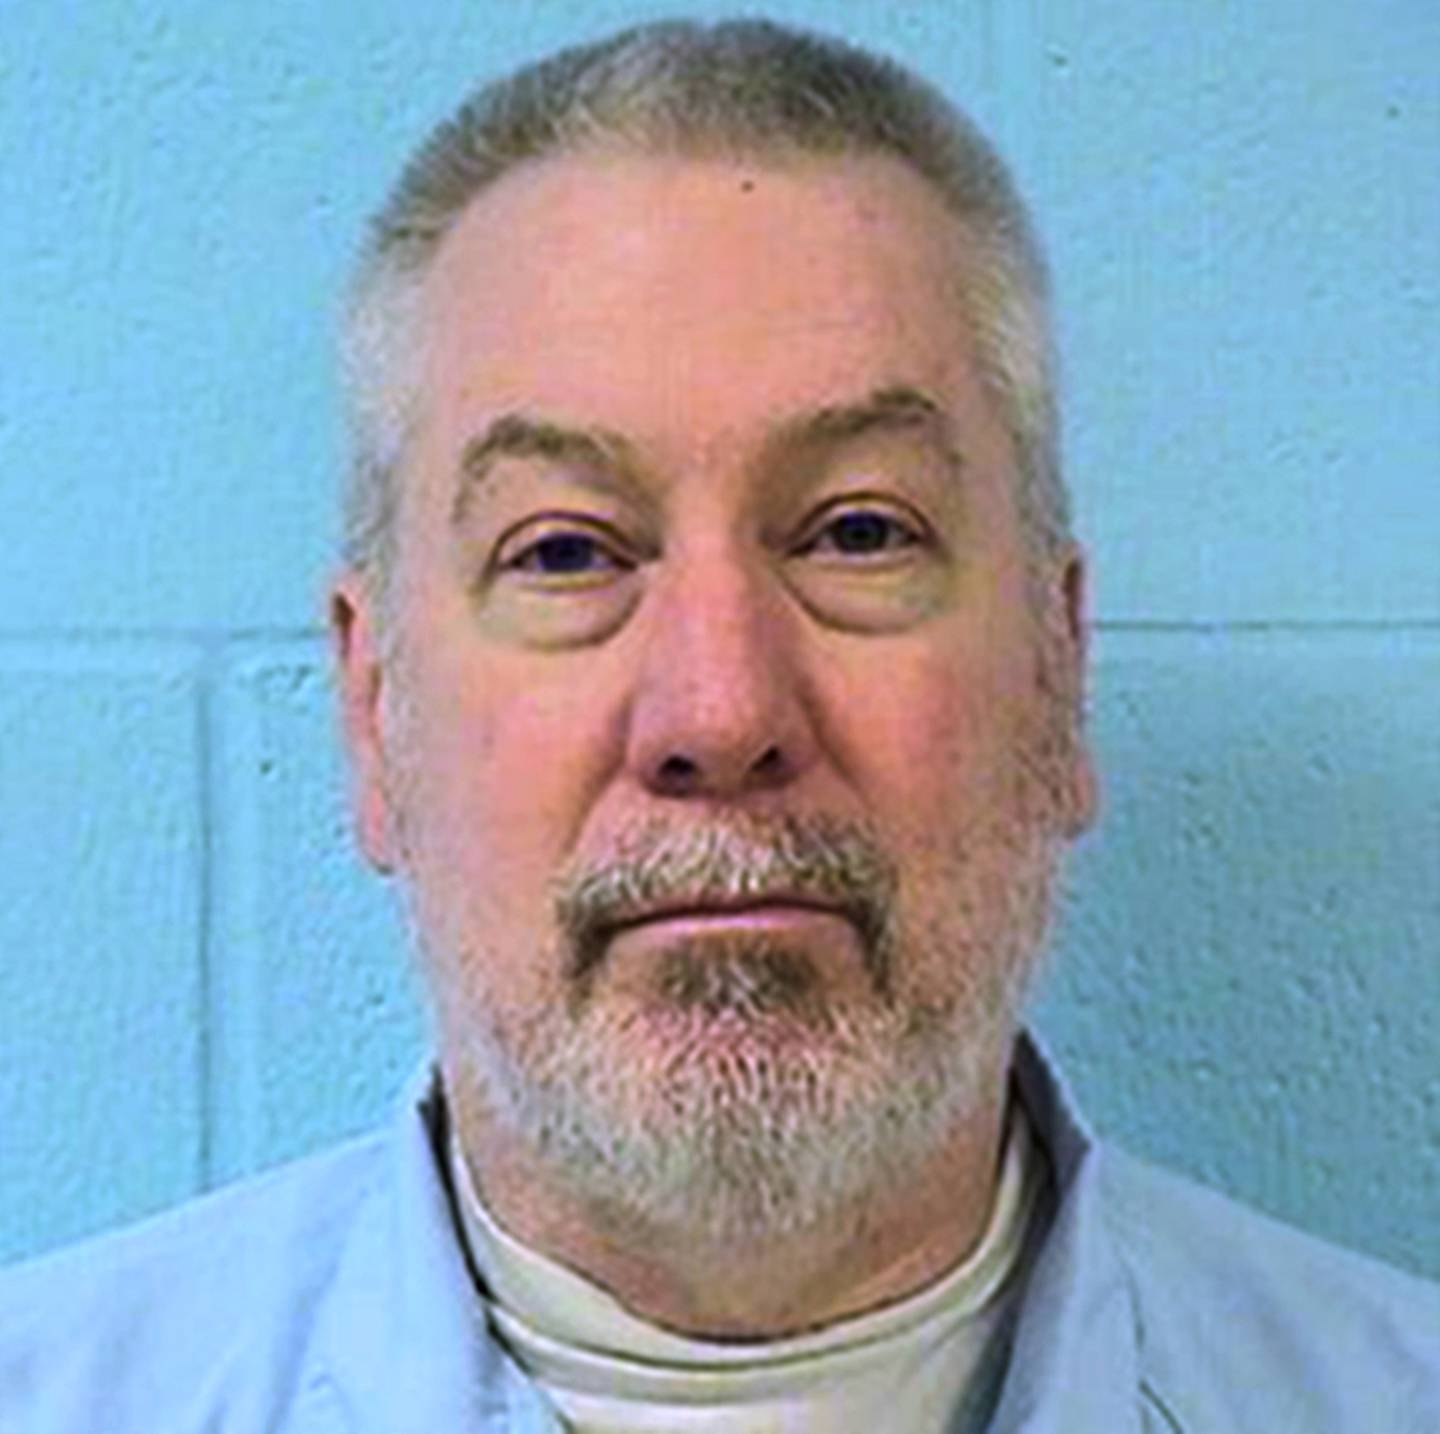 FILE - This undated file photo provided by the Illinois Department of Corrections shows former Bolingbrook, Ill., police officer Drew Peterson. Peterson's murder-for-hire trial in southern Illinois was postponed by a Randolph County judge Tuesday, Sept. 29, 2015, until early next year. Peterson is charged with soliciting an inmate to kill Will County State's Attorney James Glasgow, who prosecuted the 2012 case in which Peterson was sentenced to 38 years in prison for the bathtub drowning death of ex-wife Kathleen Savio.  (Illinois Department of Corrections via AP, File)